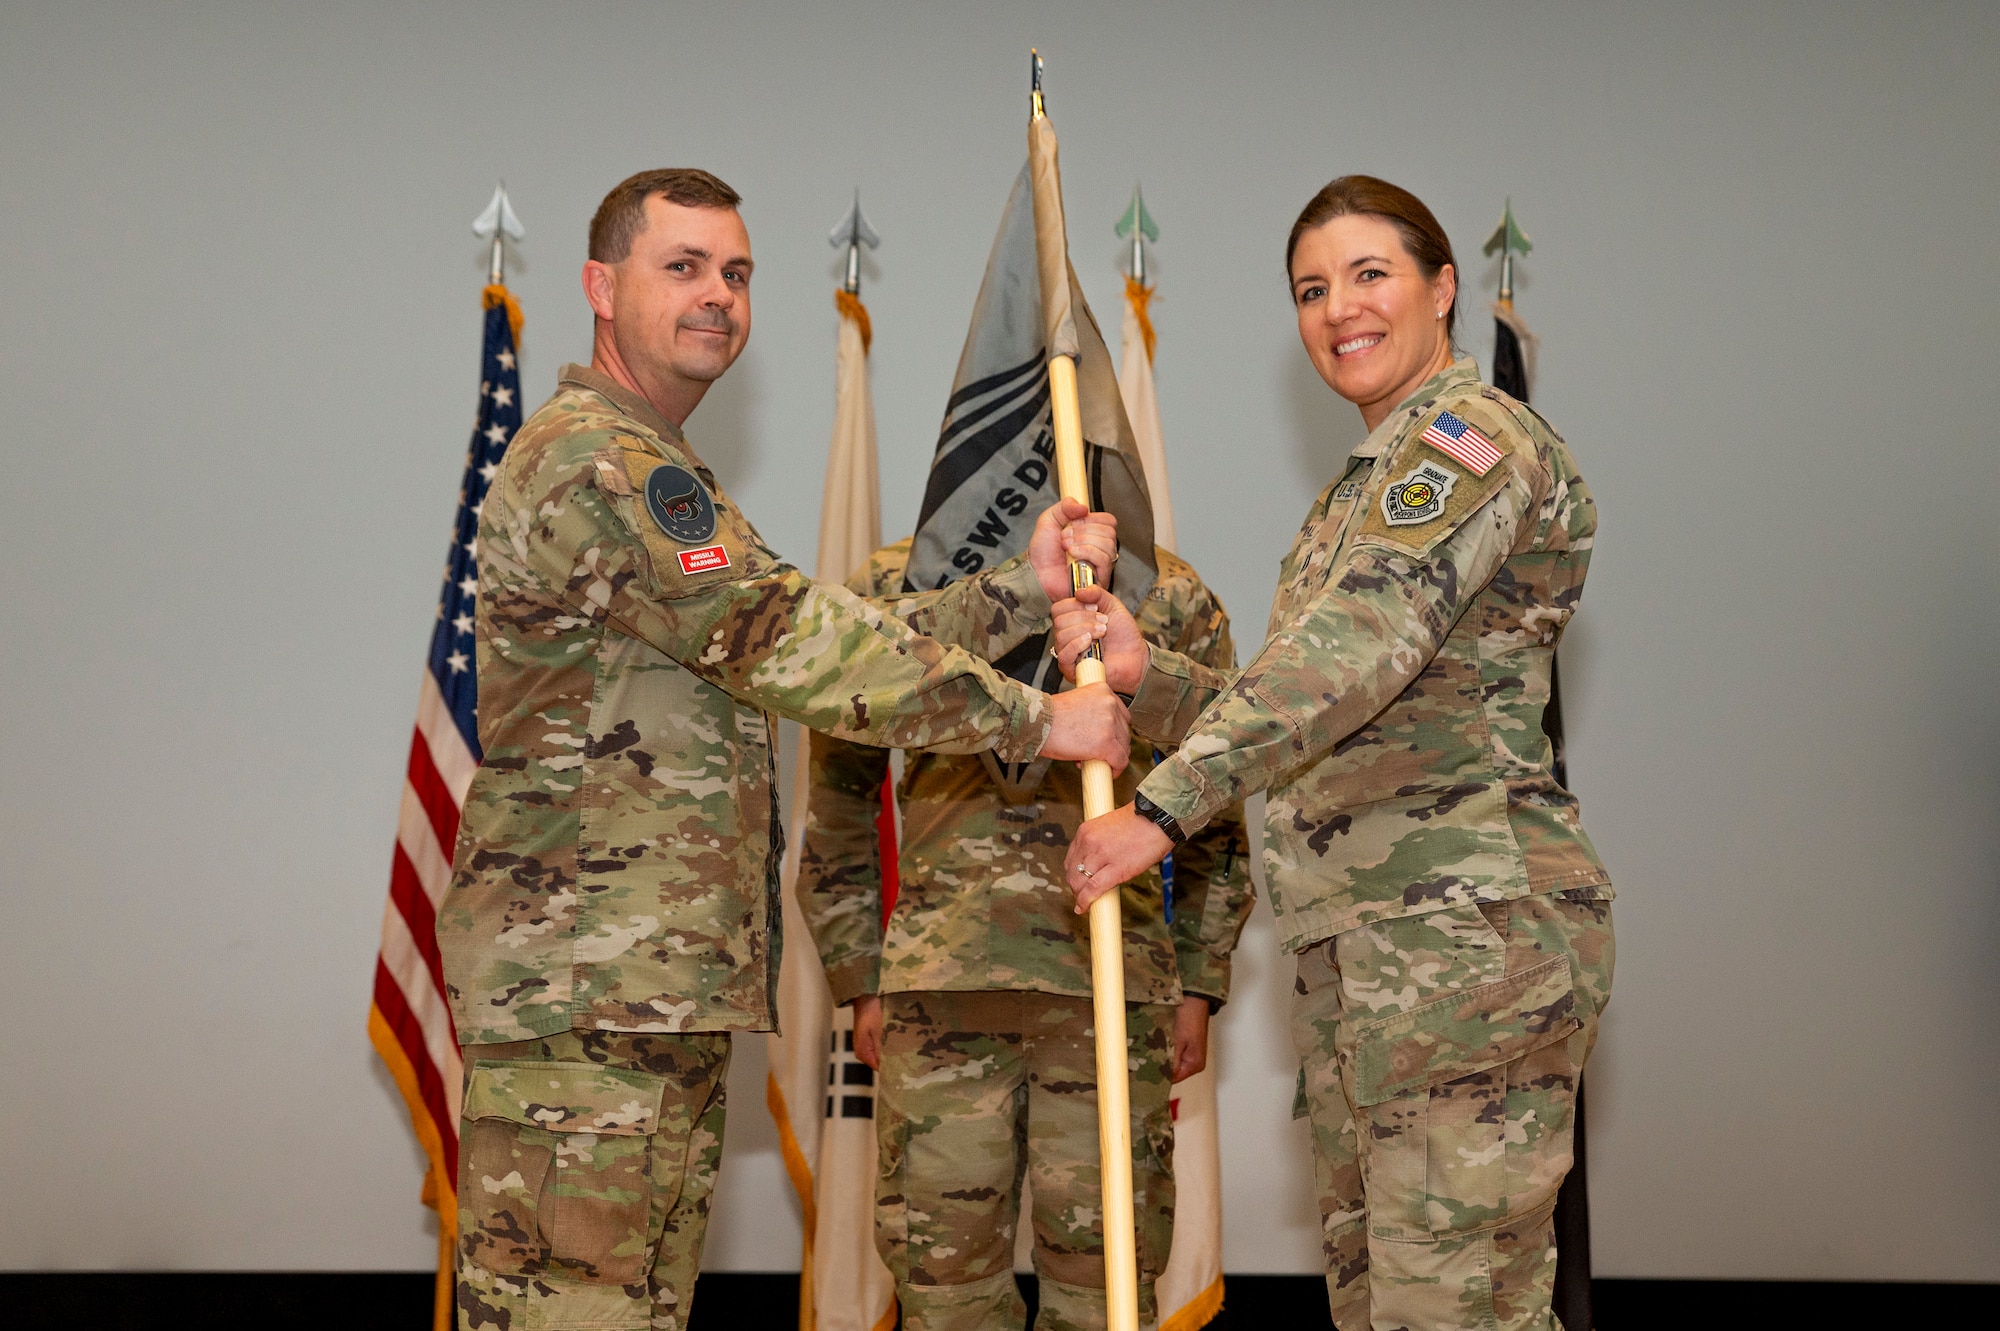 U.S. Space Force Lt. Col. Micheal Provencher, 5th Space Warning Squadron commander, appoints Capt. April Dybal as commander of the newly activated 5th SWS Detachment 3 at Osan Air Base, Republic of Korea, Oct. 27, 2023.